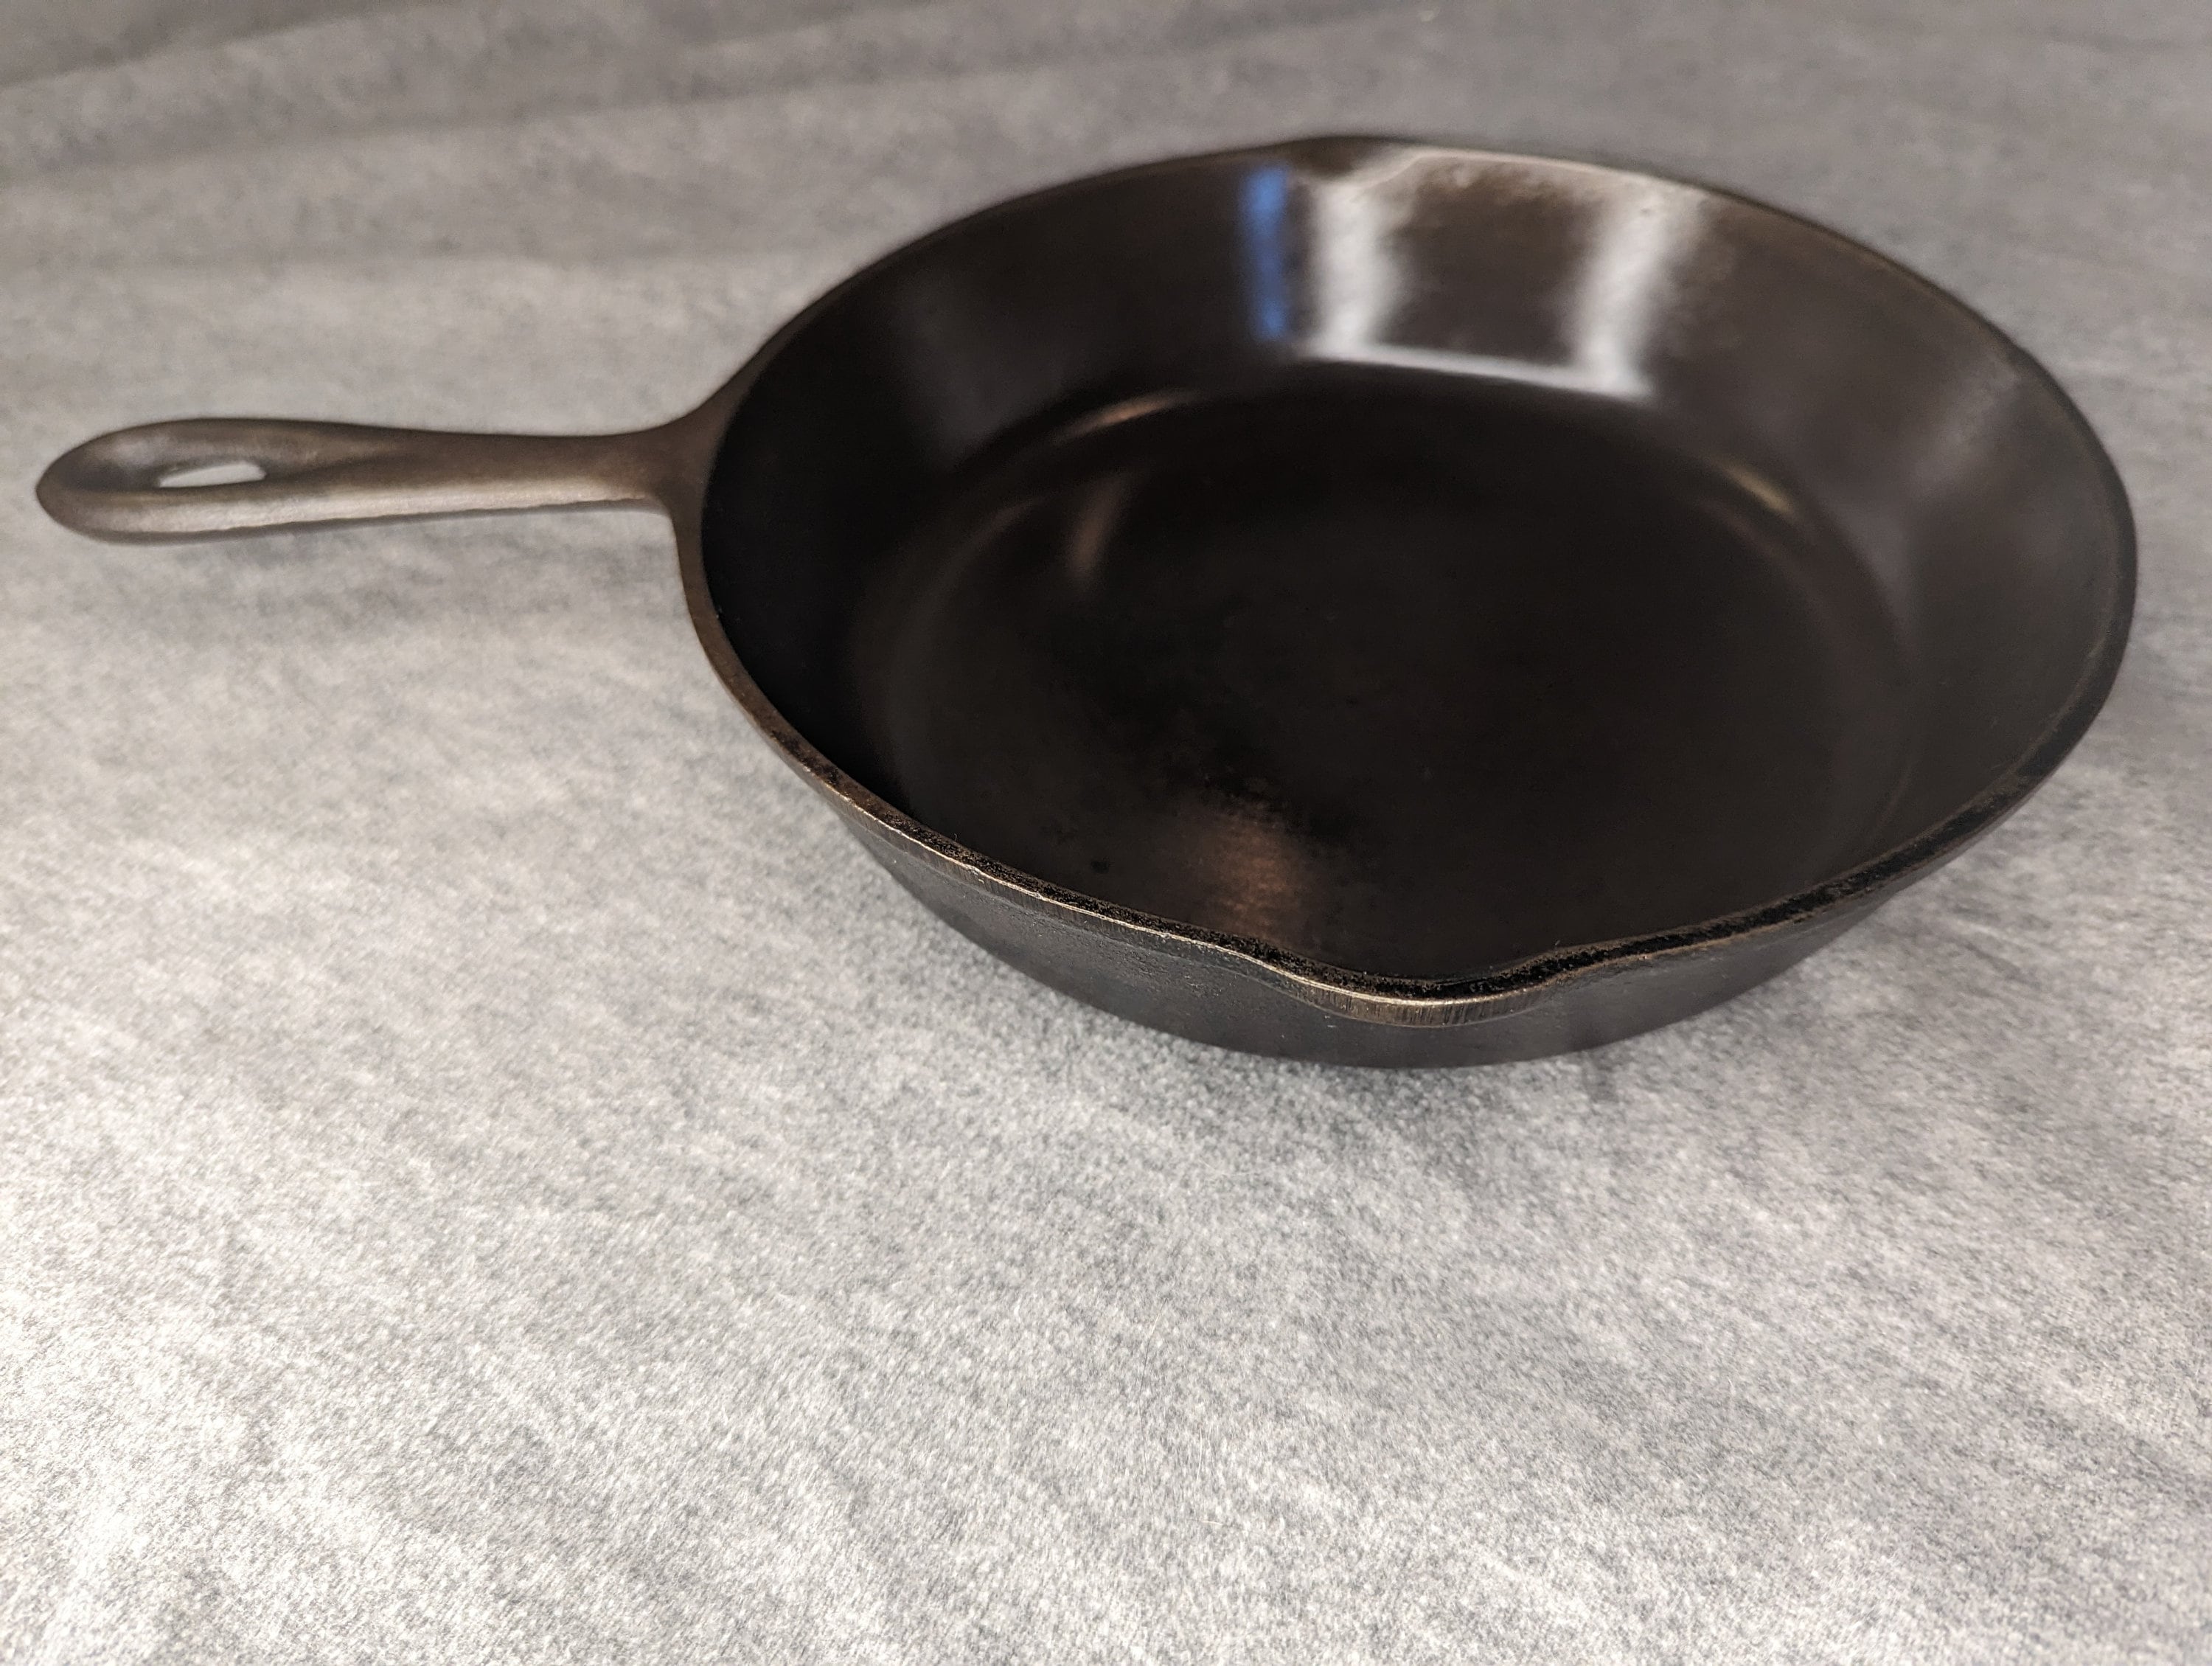 Vintage BSR USA No. 5 8 1/8 Inch Cast Iron Skillet Pan – Standpipe Antiques